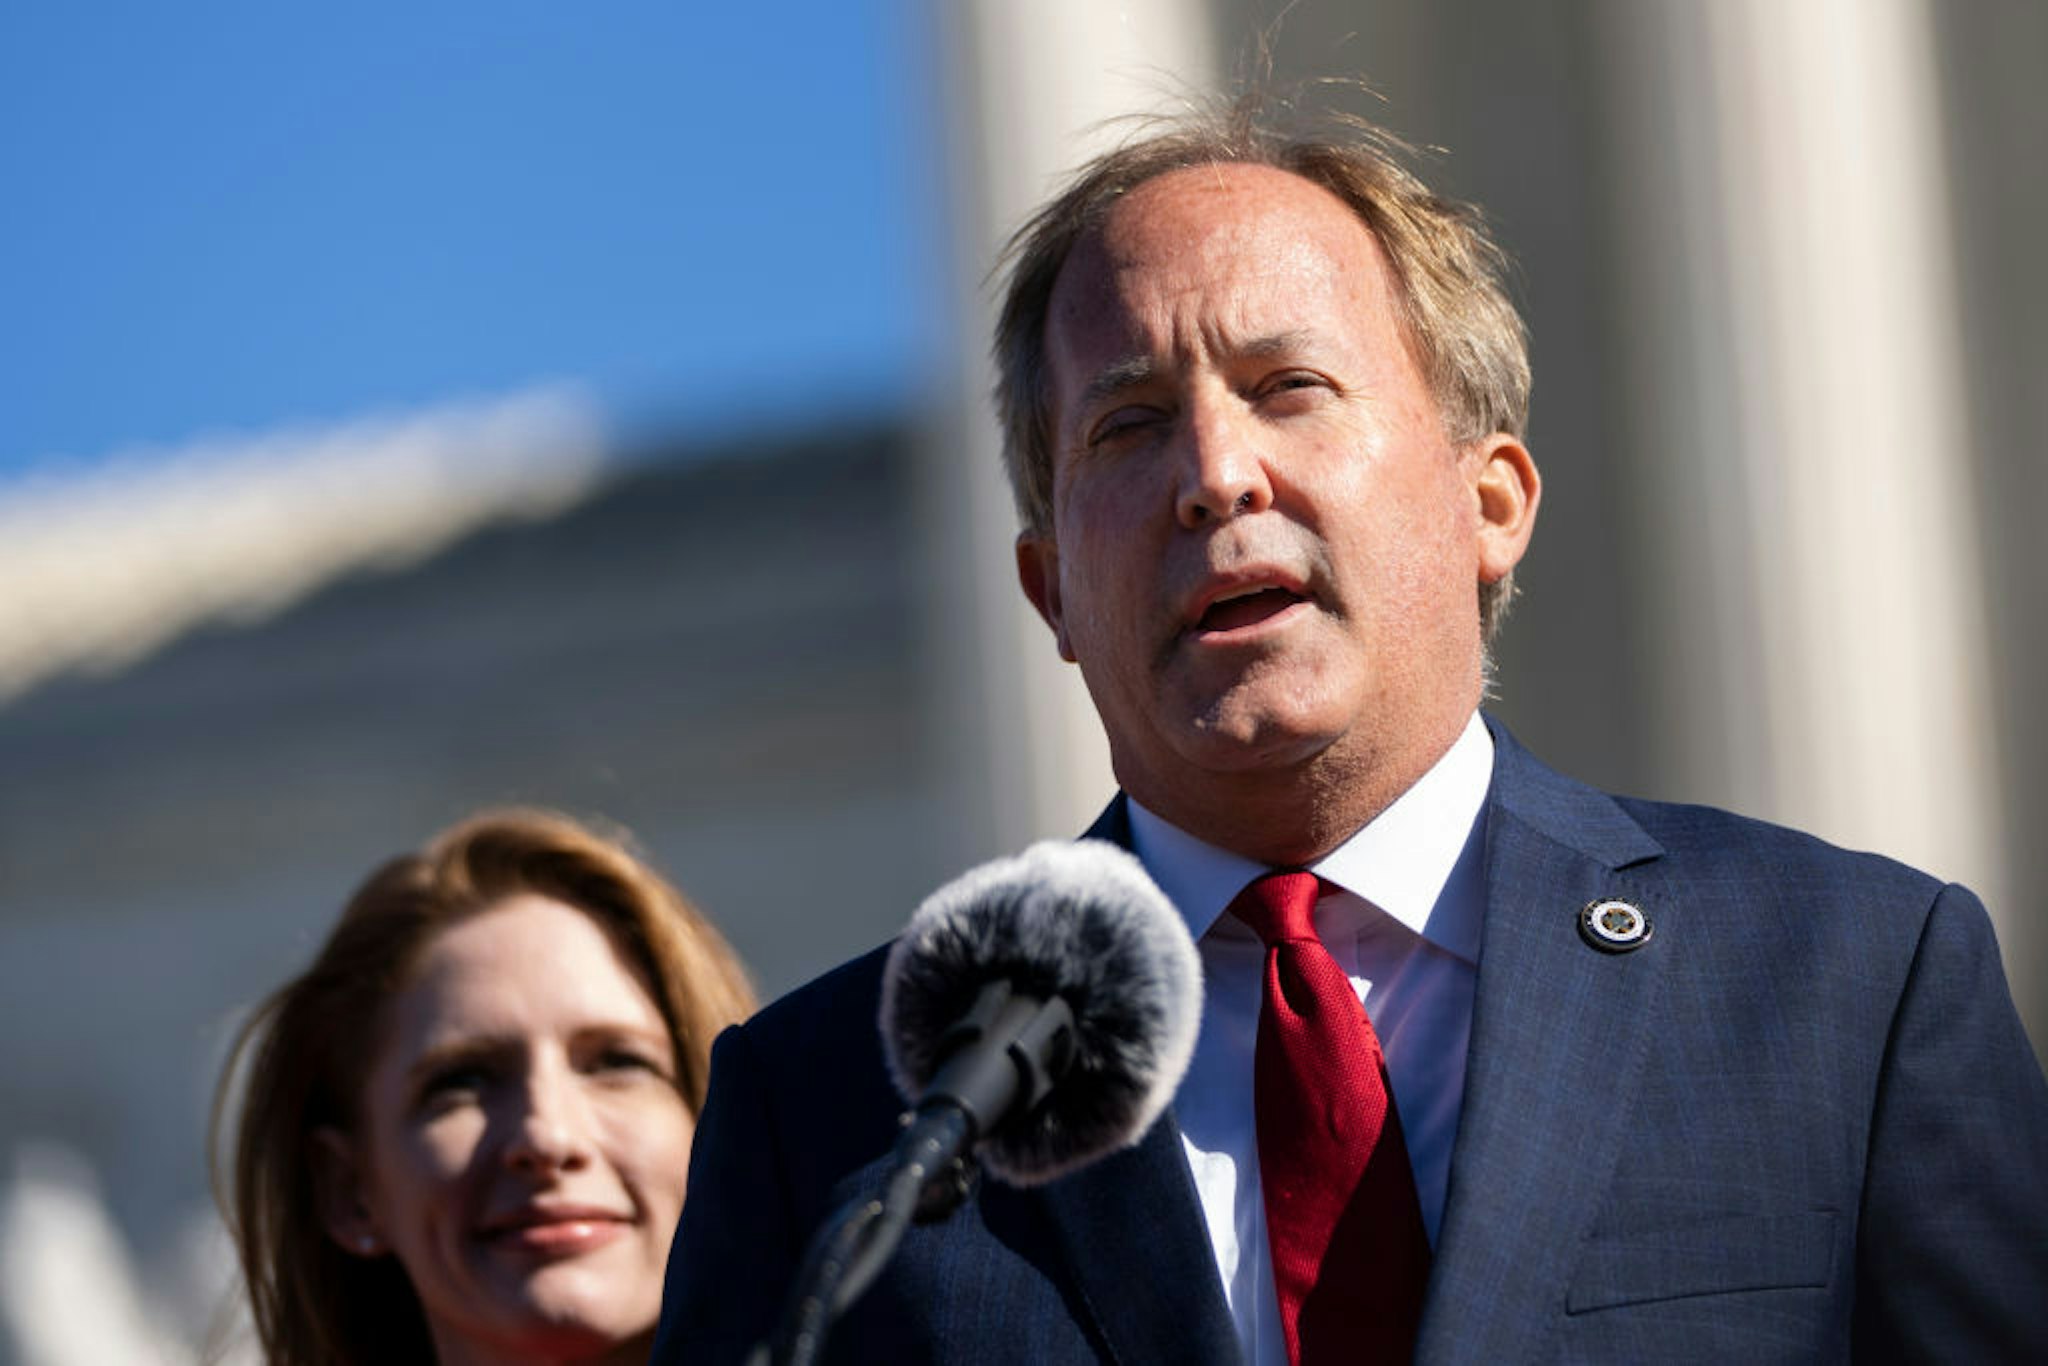 WASHINGTON, DC - NOVEMBER 01: Texas Attorney General Ken Paxton speaks outside the U.S. Supreme Court on November 01, 2021 in Washington, DC. On Monday, the Supreme Court heard arguments in a challenge to the controversial Texas abortion law which bans abortions after 6 weeks.